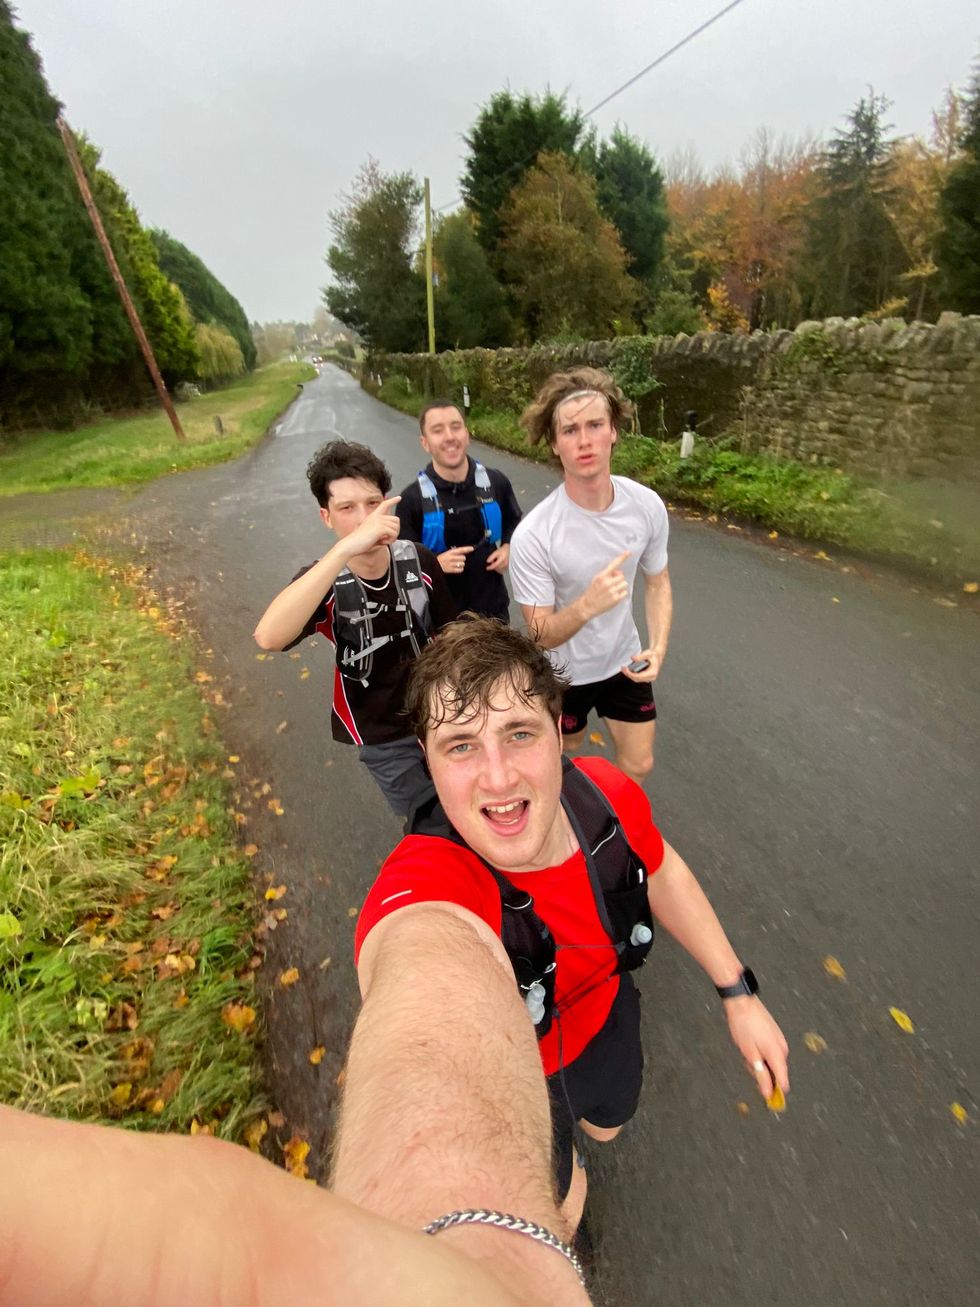 Student with narcolepsy to run 70km for charity